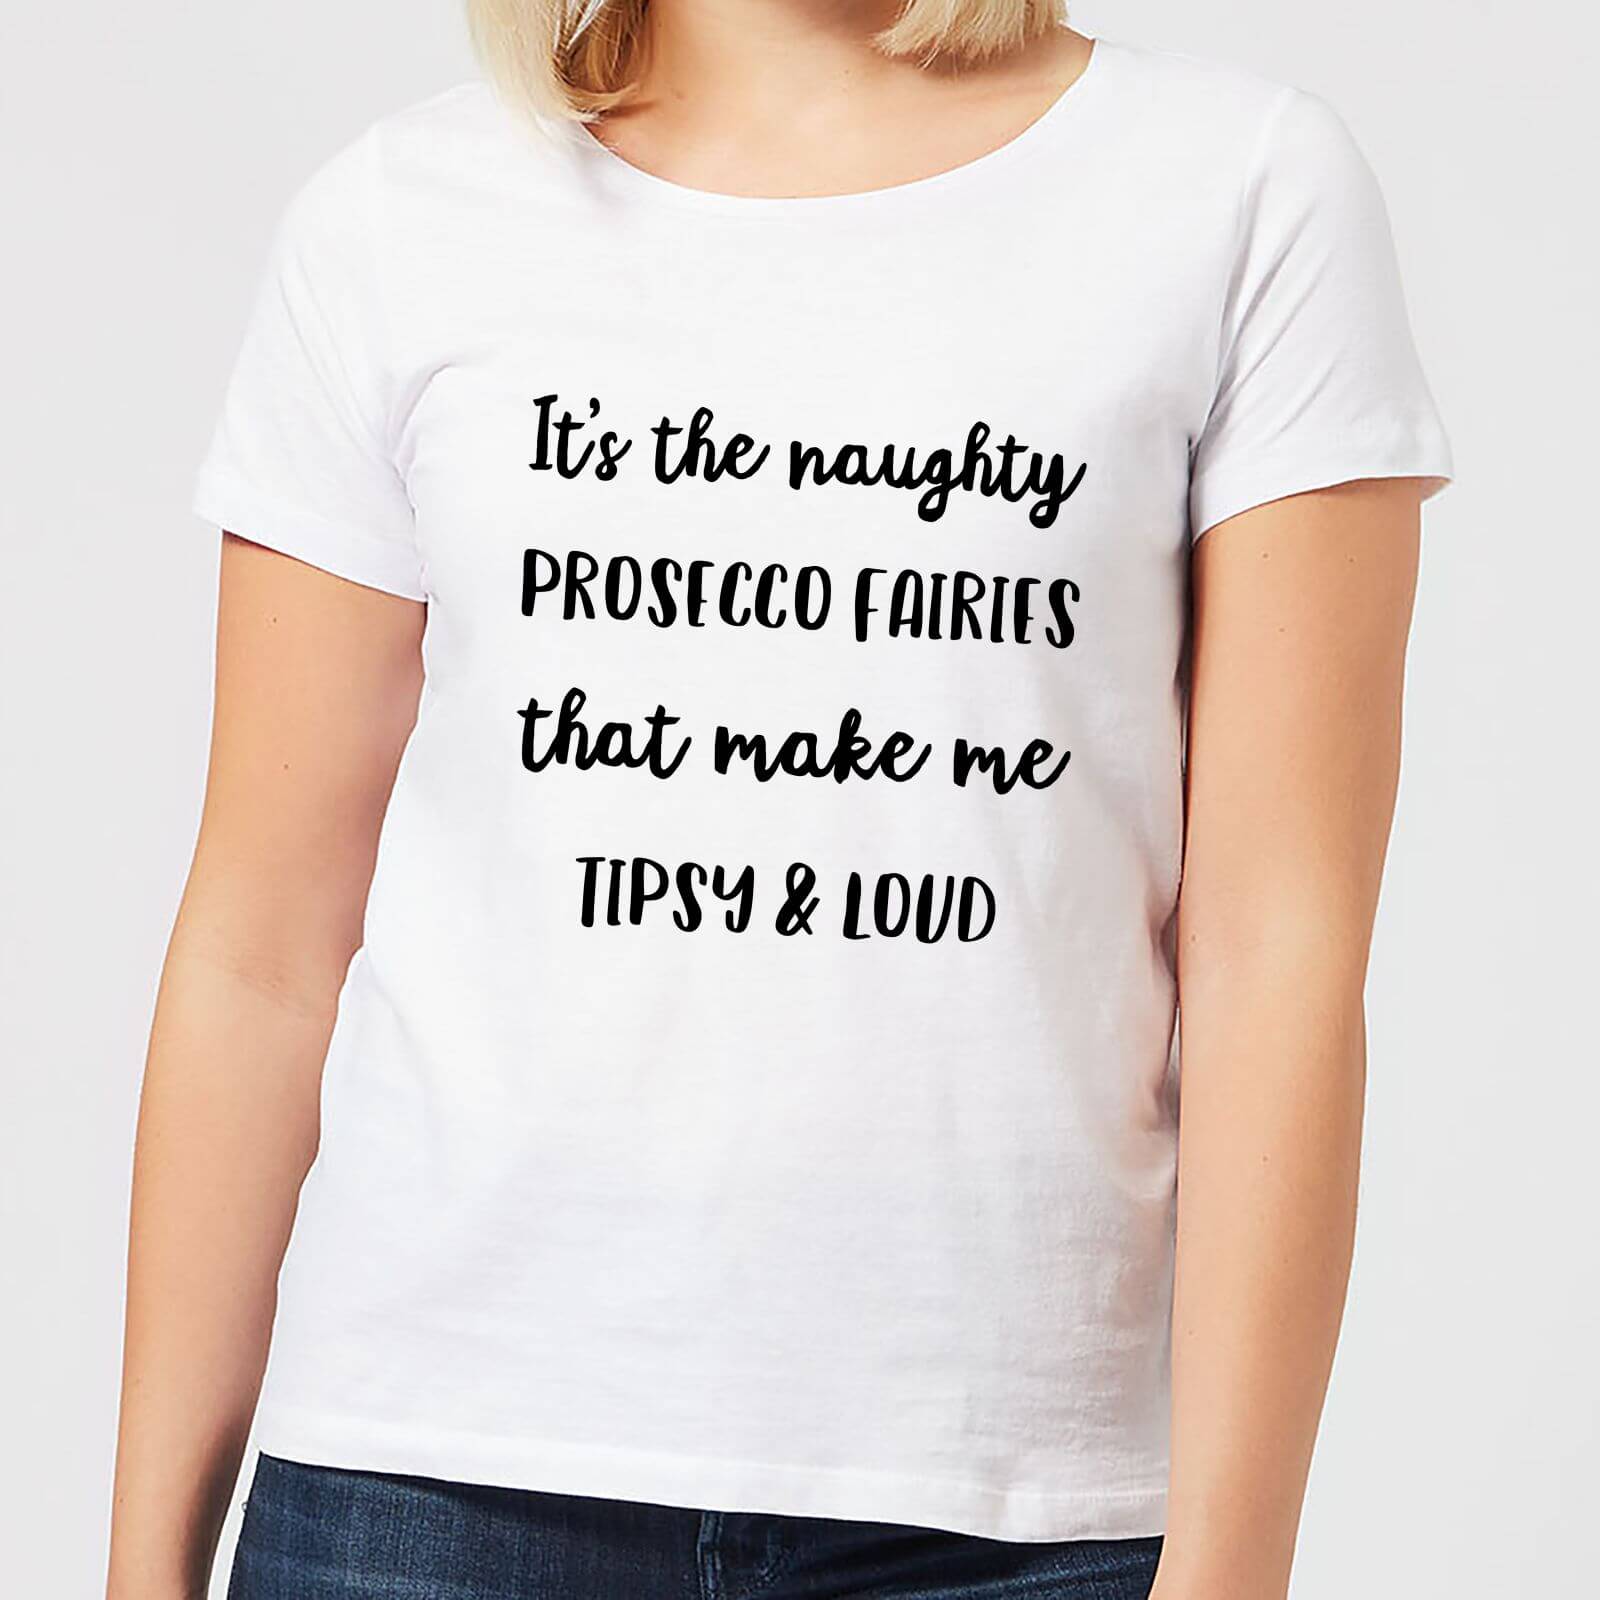 It's The Naughty Prosecco Fairies That Make Me Tipsy and Loud Women's Christmas T-Shirt - White - S - White